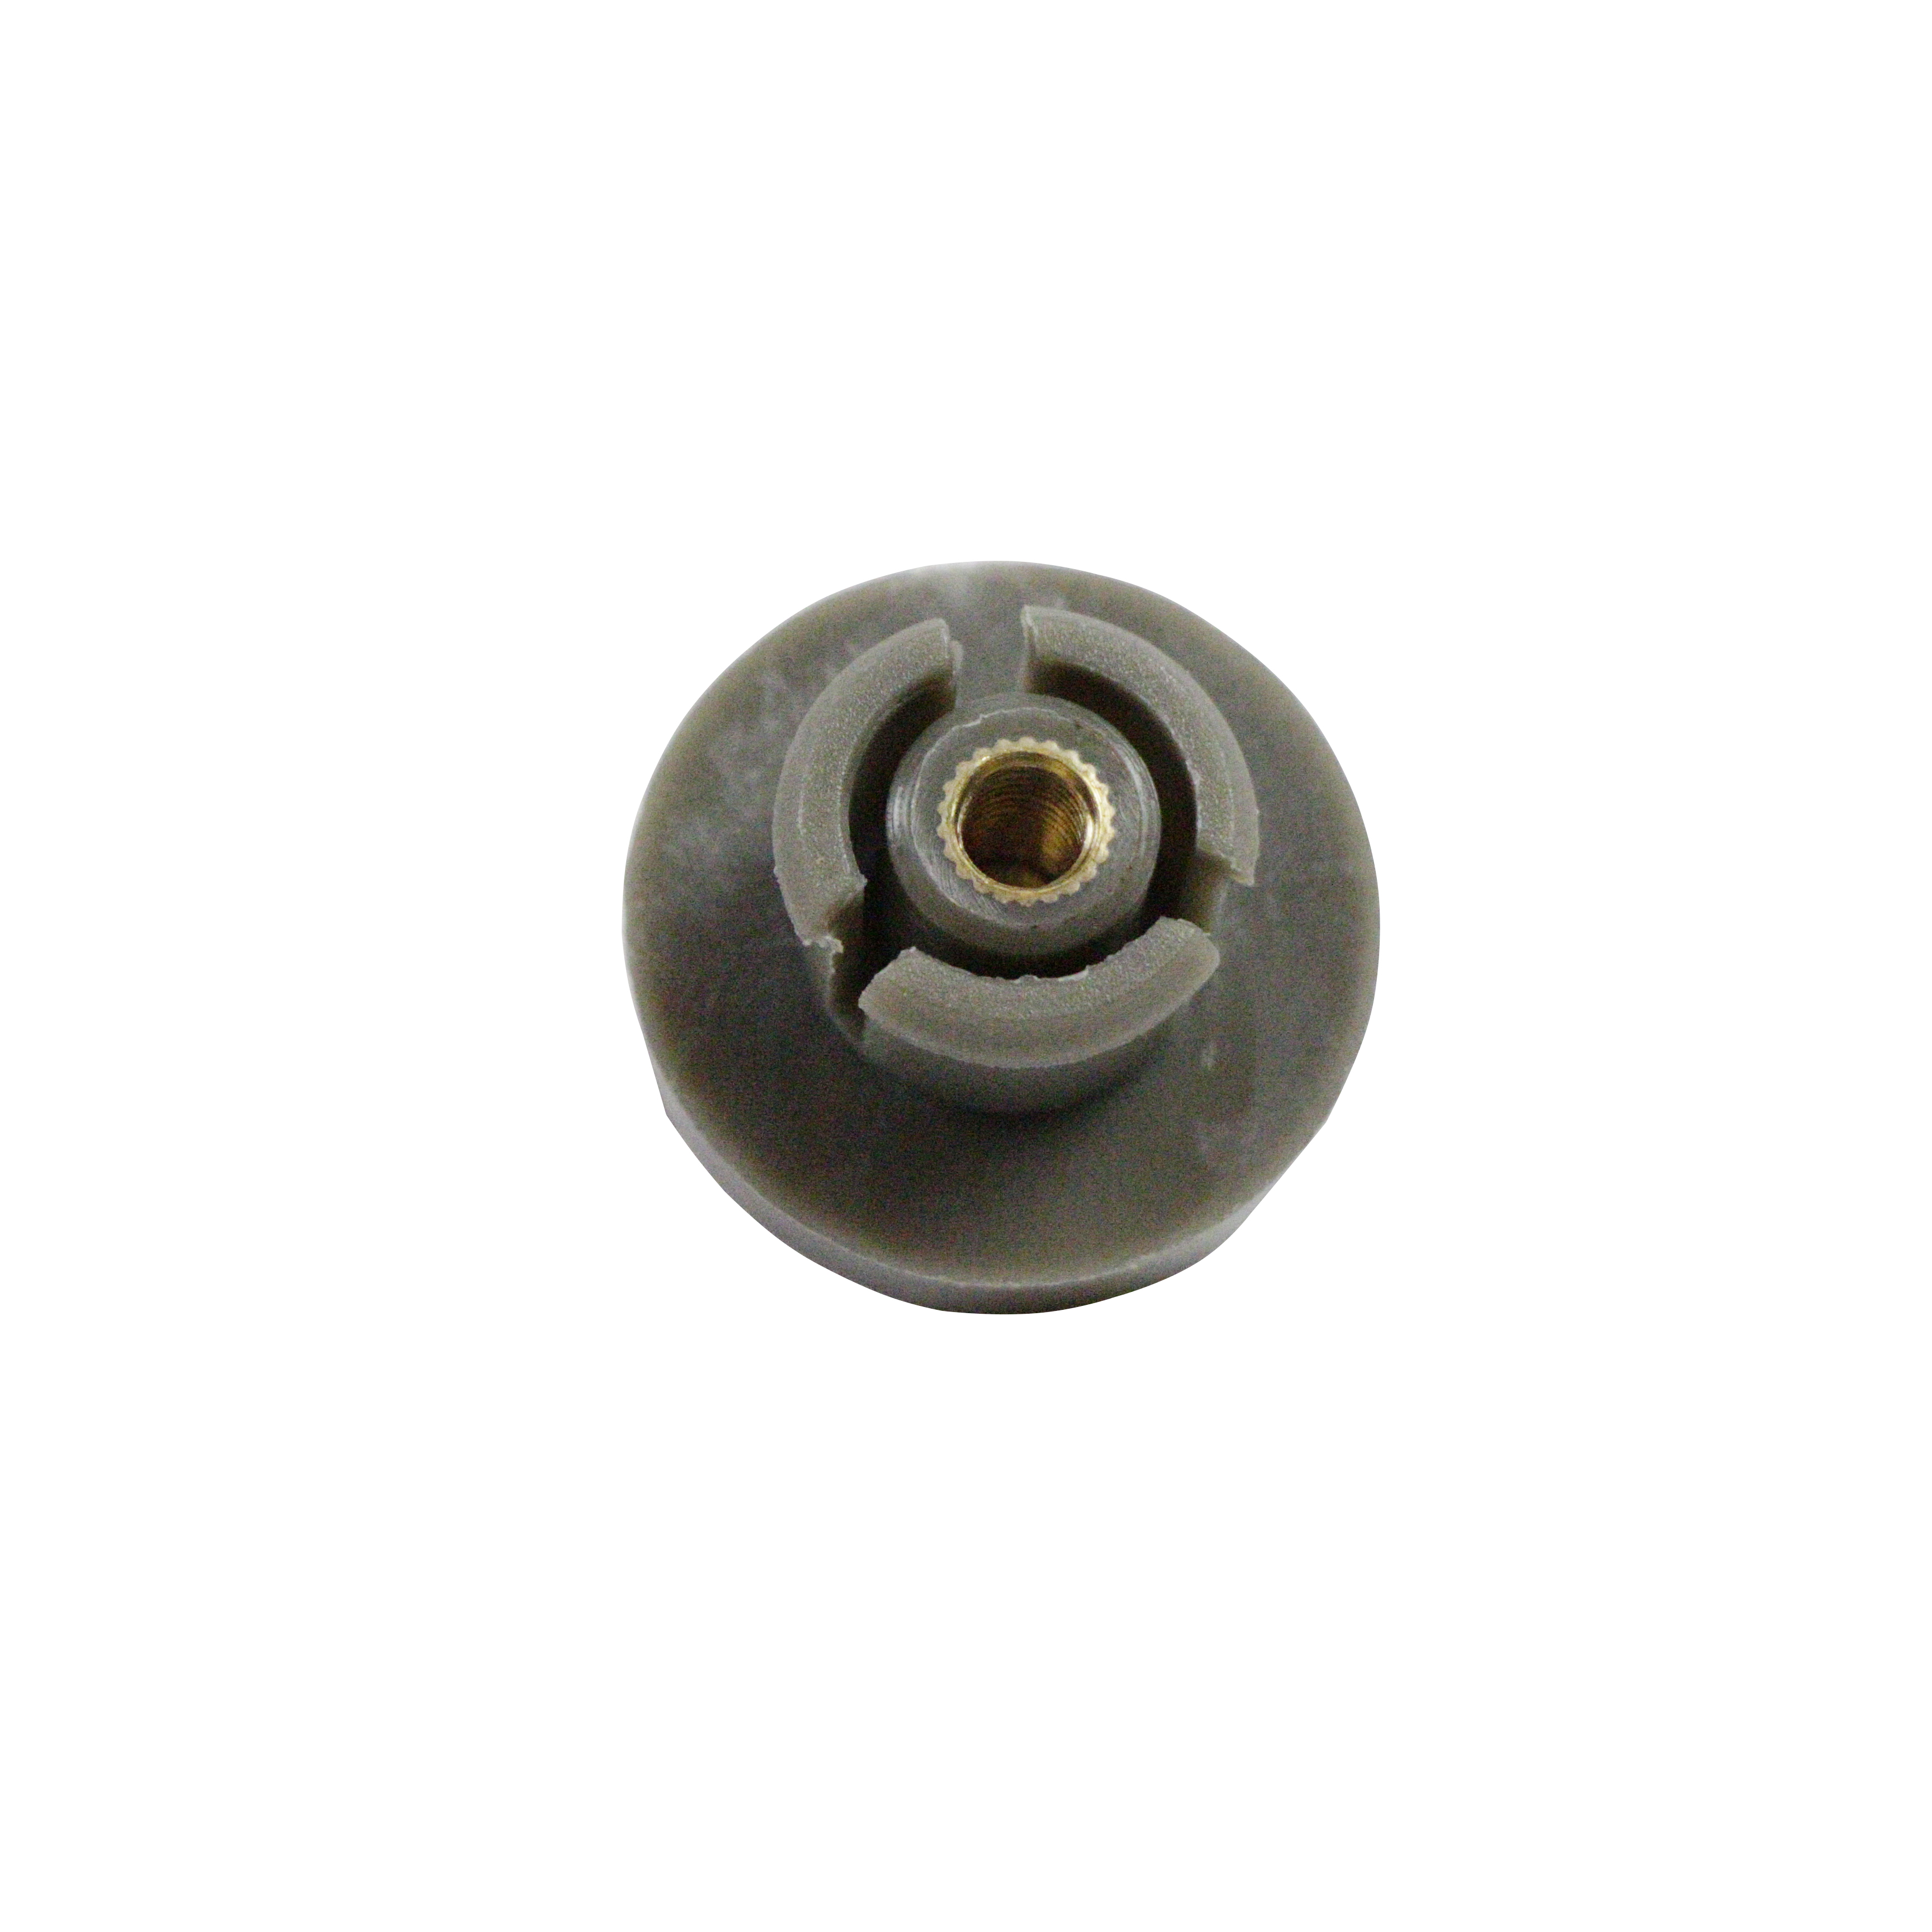 Air Filter Cover Twist Lock Knob For Joncutter G2500 Chainsaw